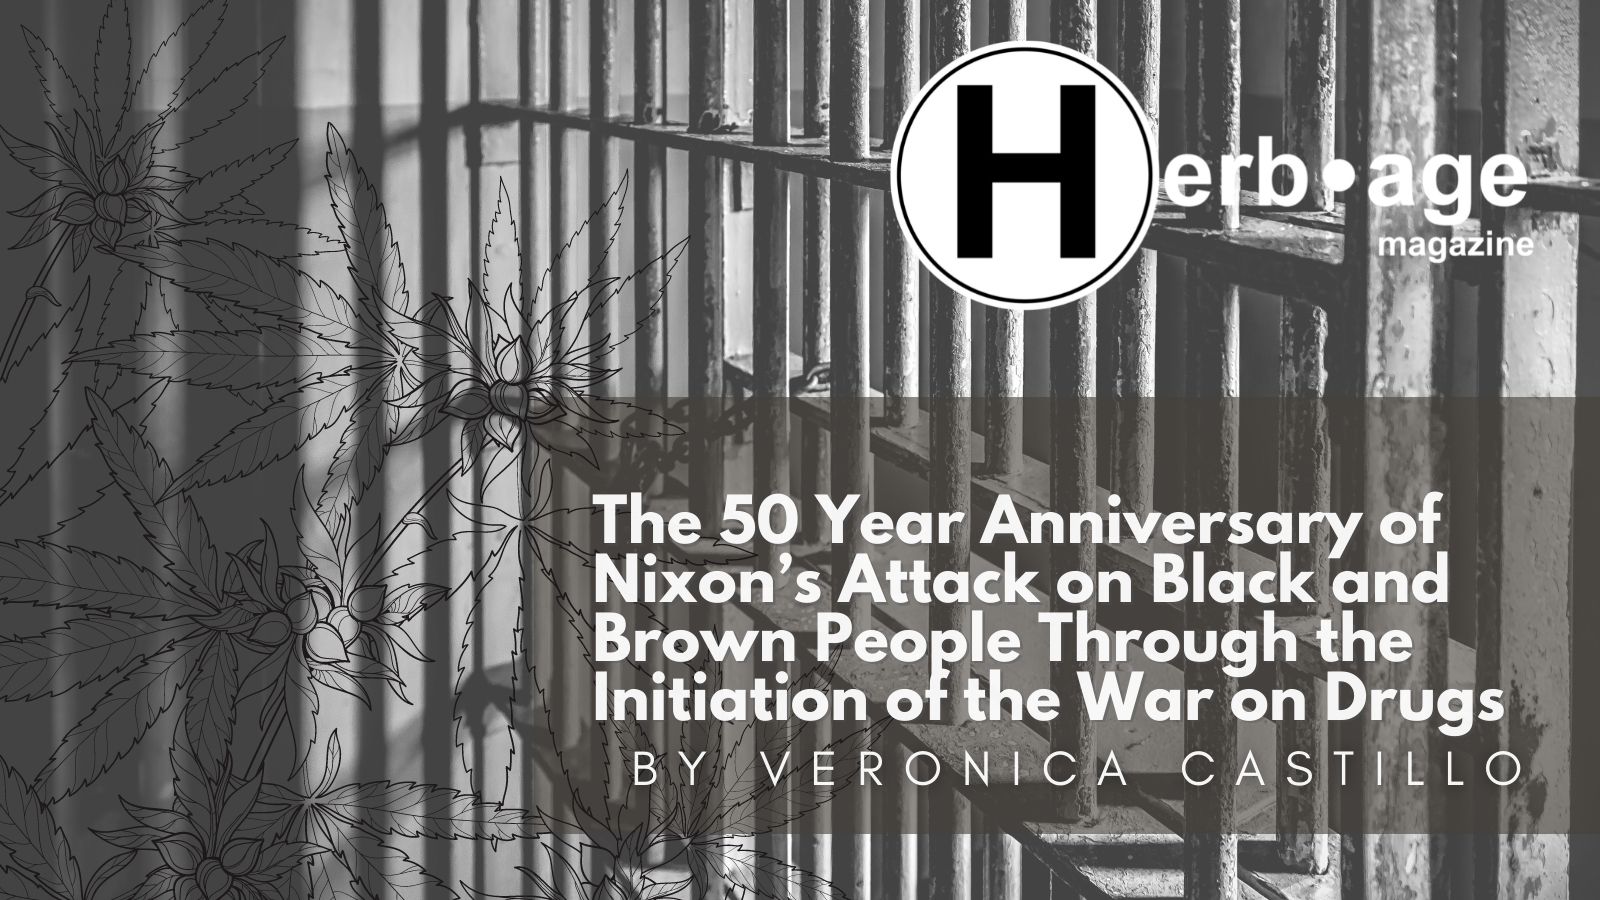 The 50 Year Anniversary of Nixon’s Attack on Black and Brown People Through the Initiation of the War on Drugs